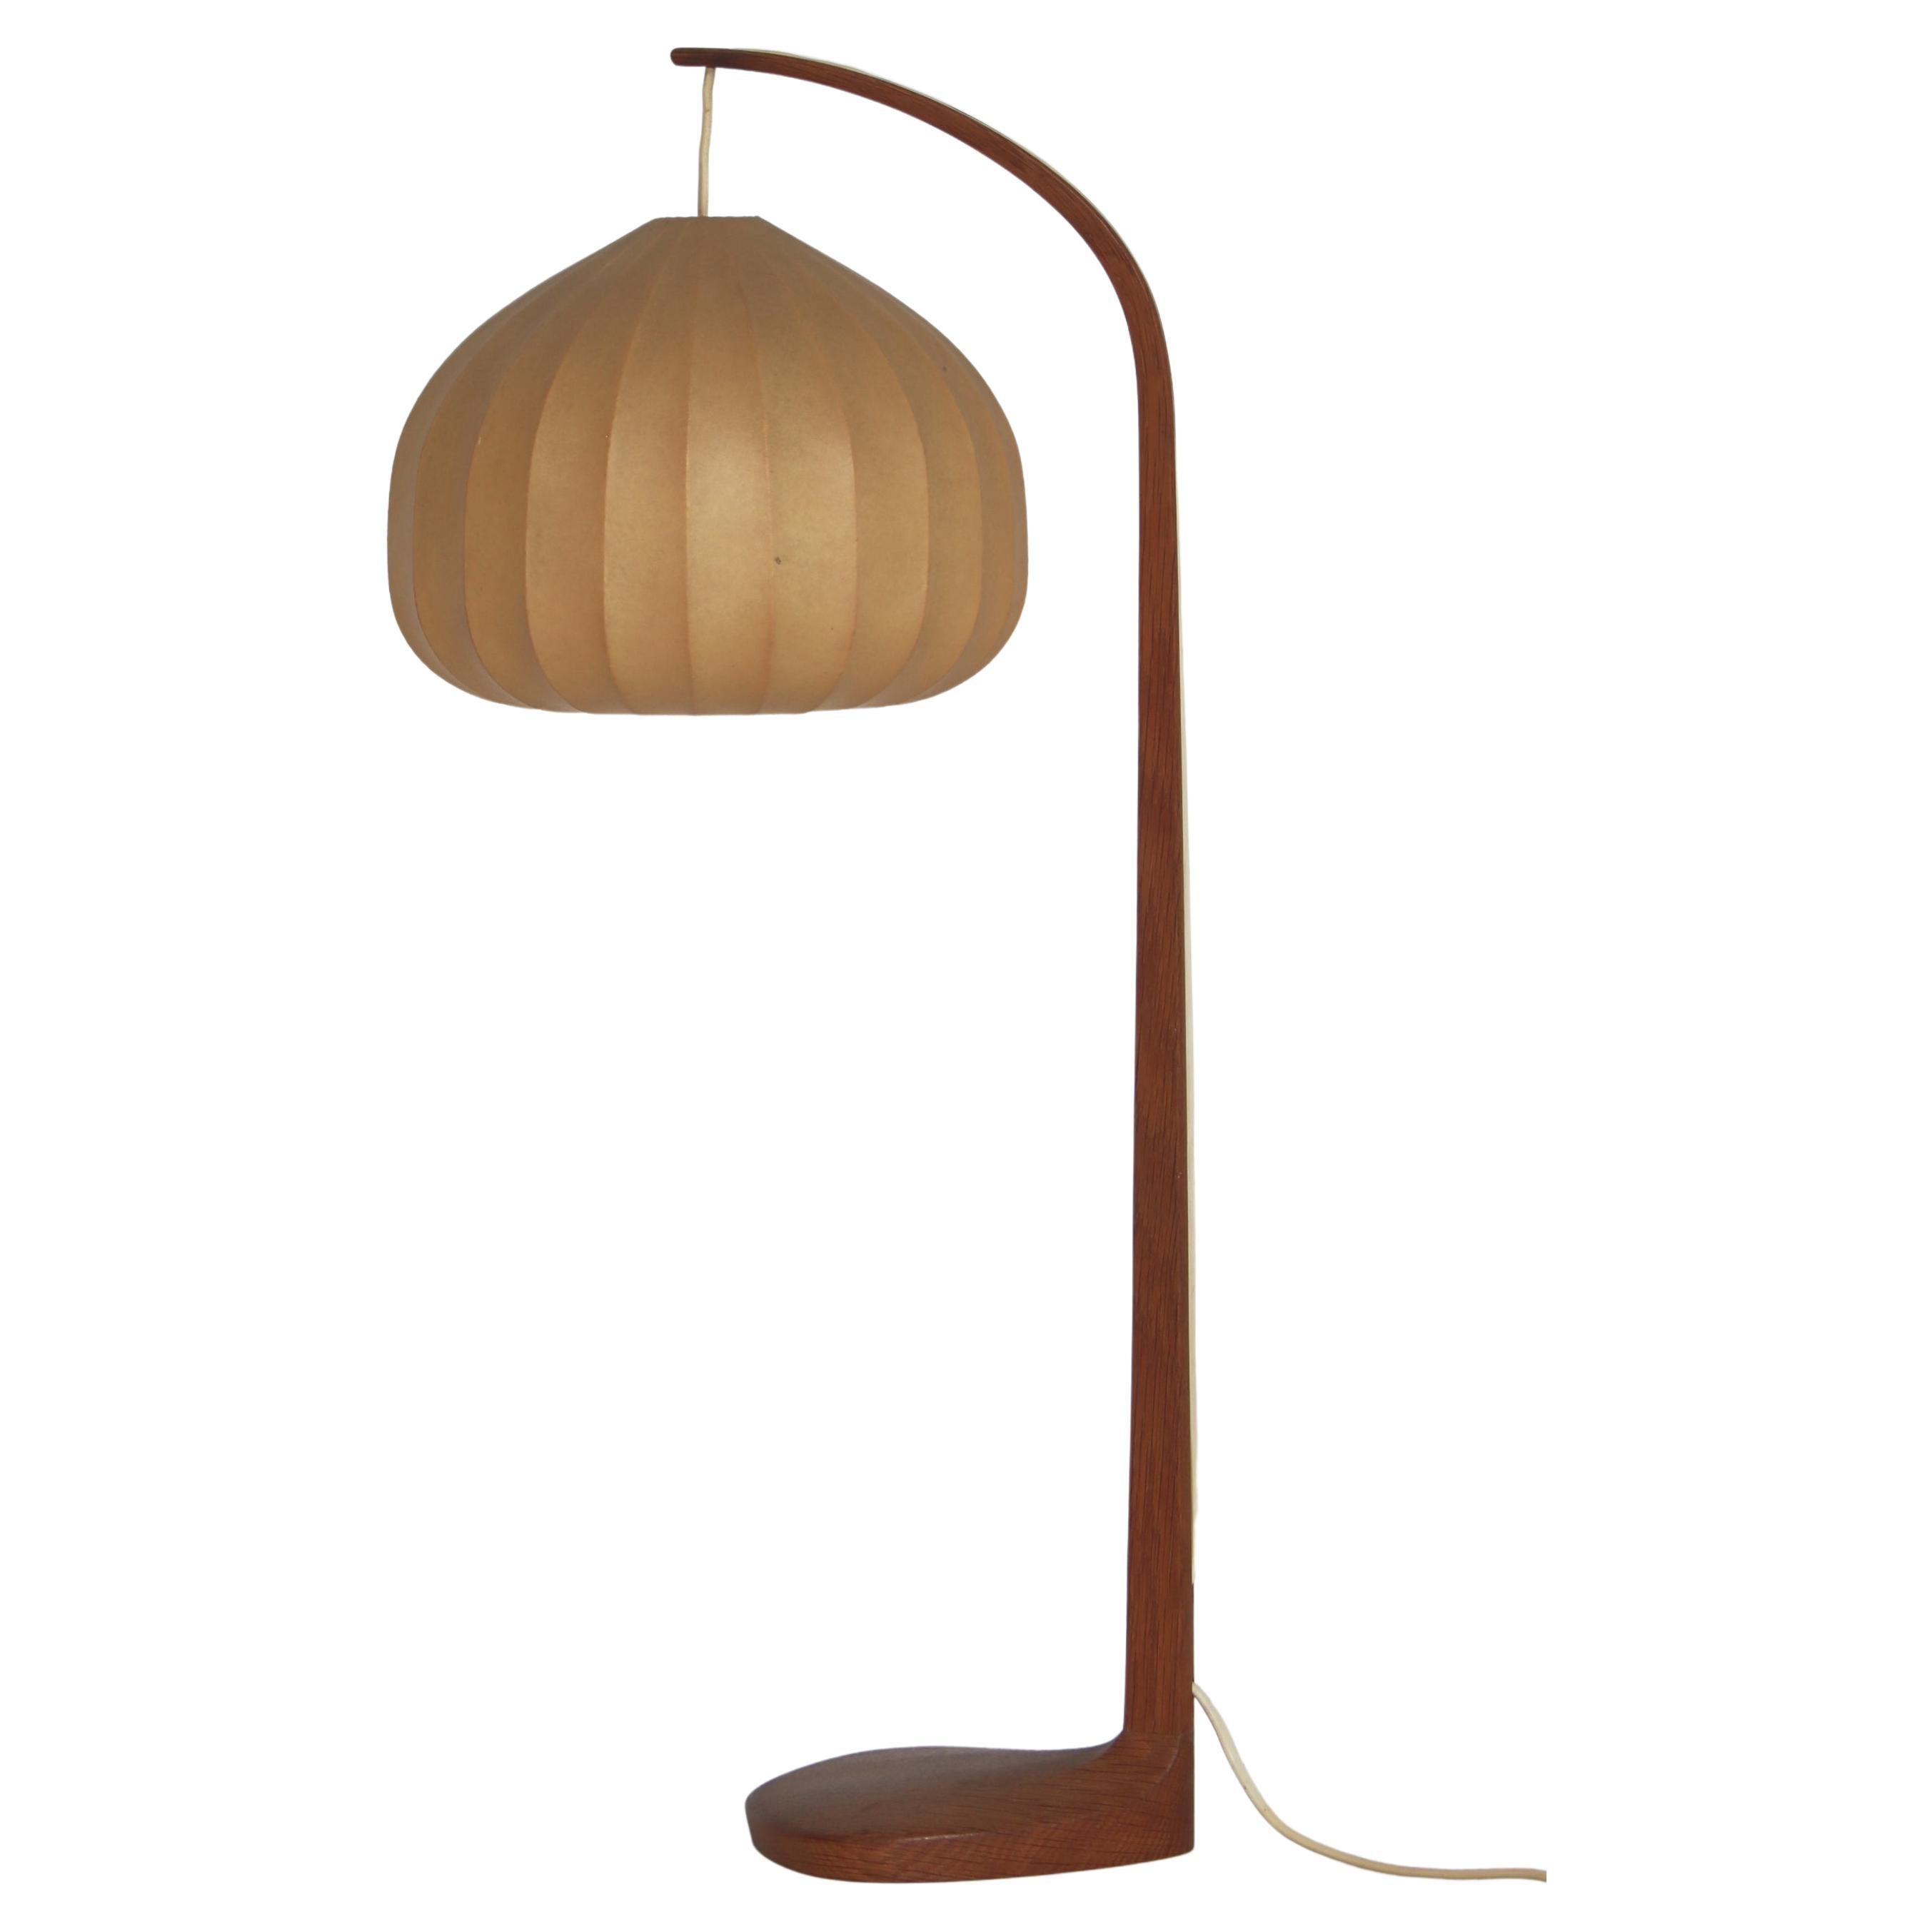 Hans Agne-Jakobsson Table Lamp in Oak and Leather, Markaryd, 1960s